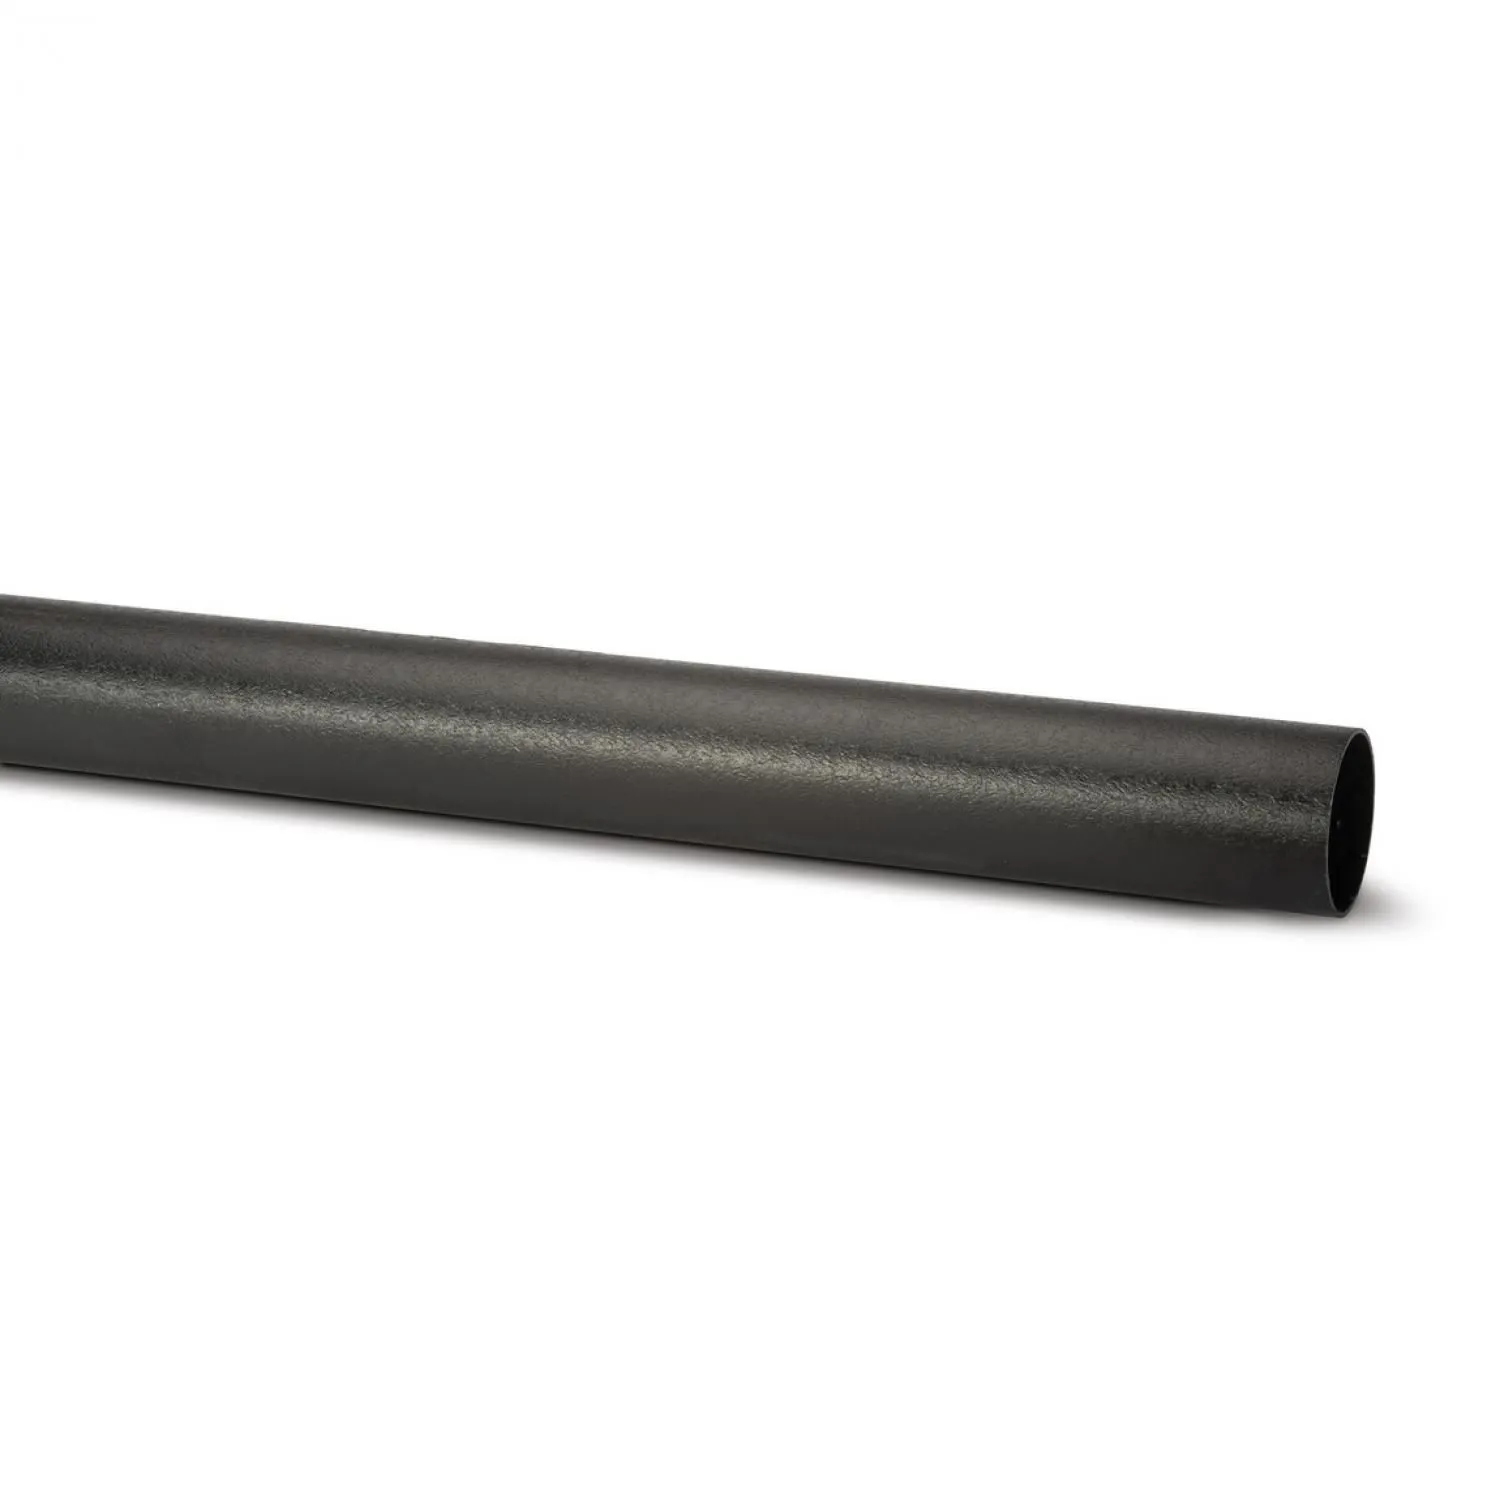 Polypipe Elegance 68mm Downpipe 2.5m Black